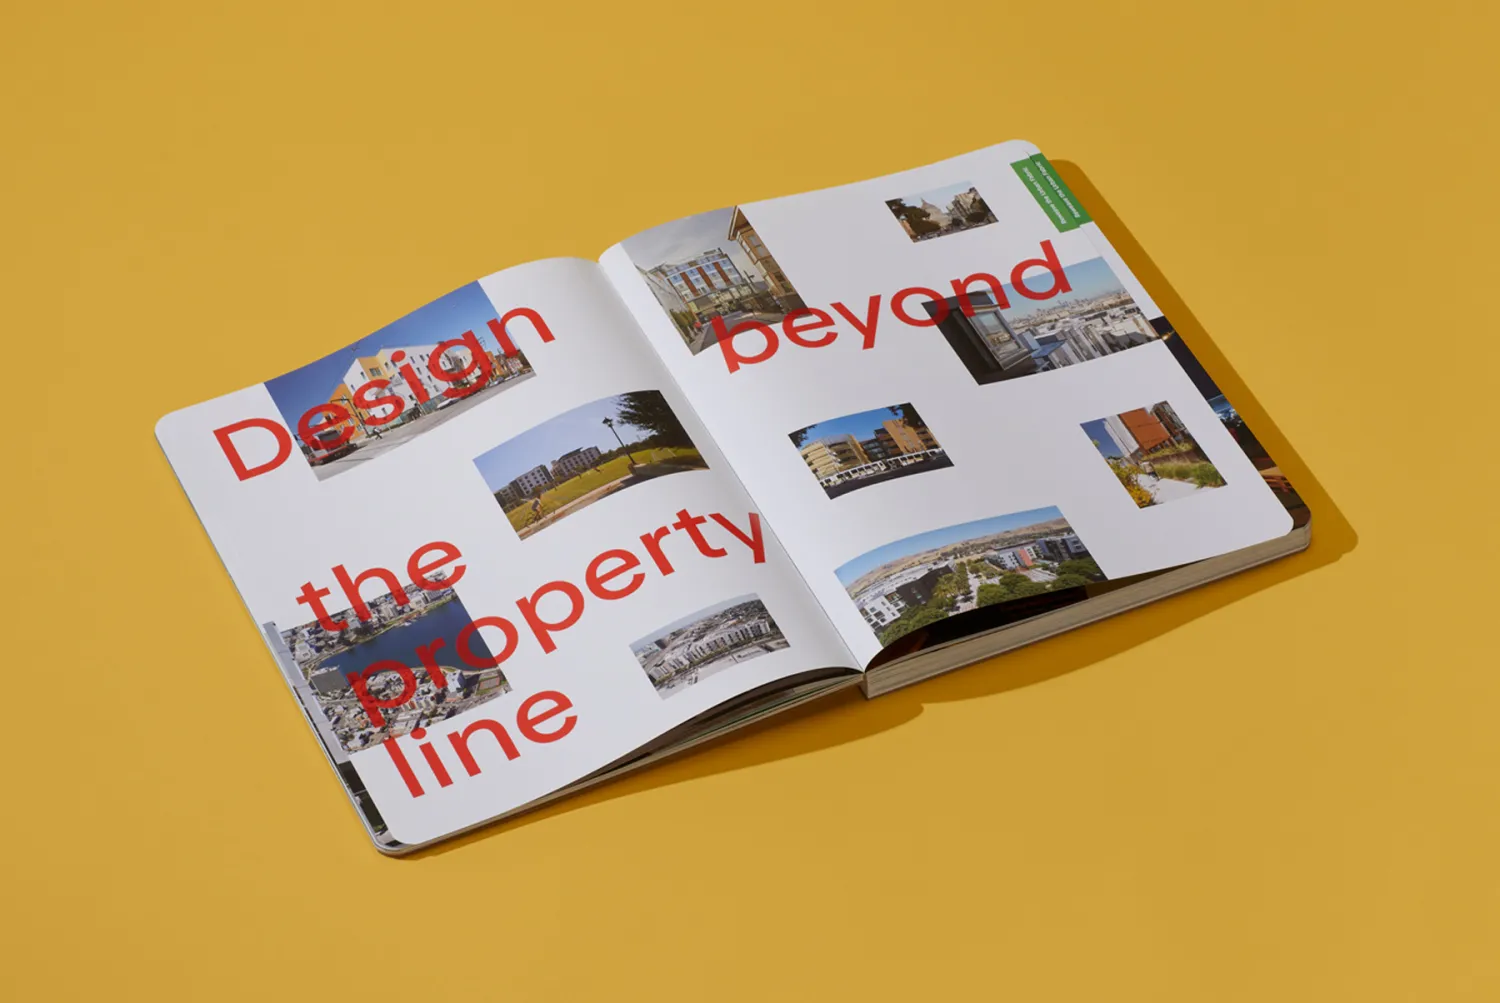 9 Ways book open to a two-page spread with project photos overlaid with the text: "Design beyond the property line"